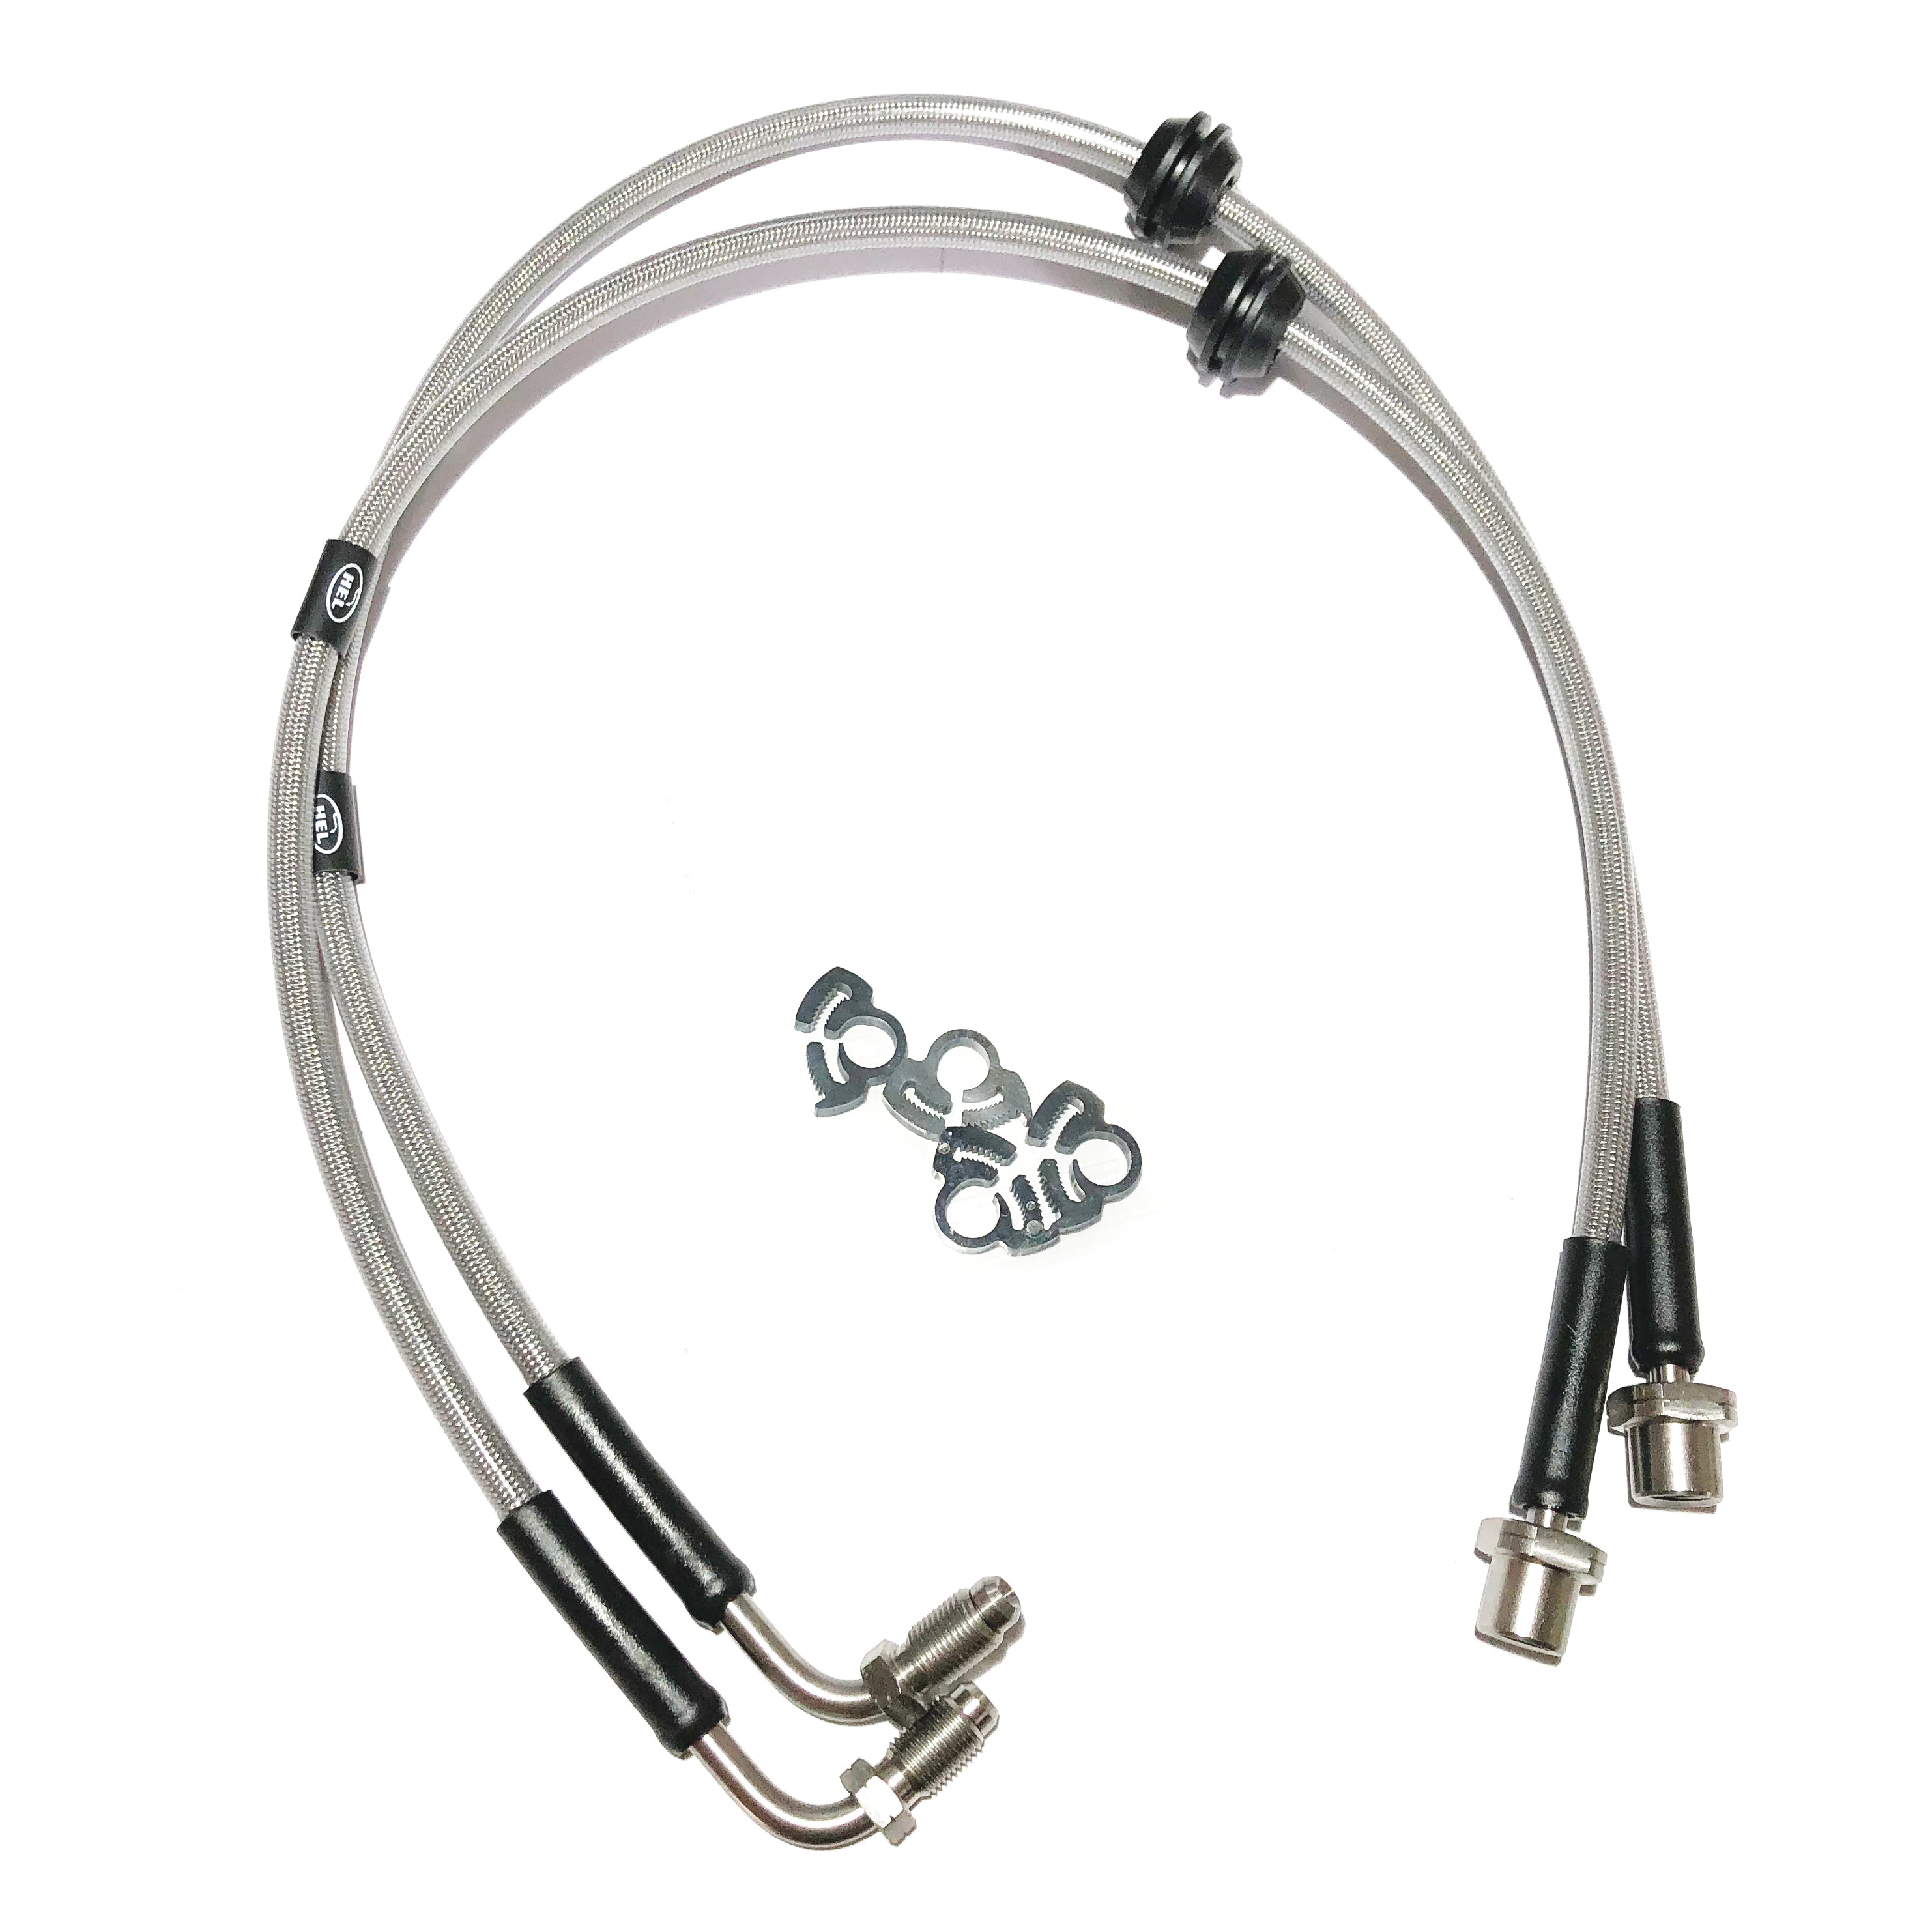 Braided Brake Hoses - Custom made by HEL to fit R53 / R56 Mini with Porsche Brembo Calipers